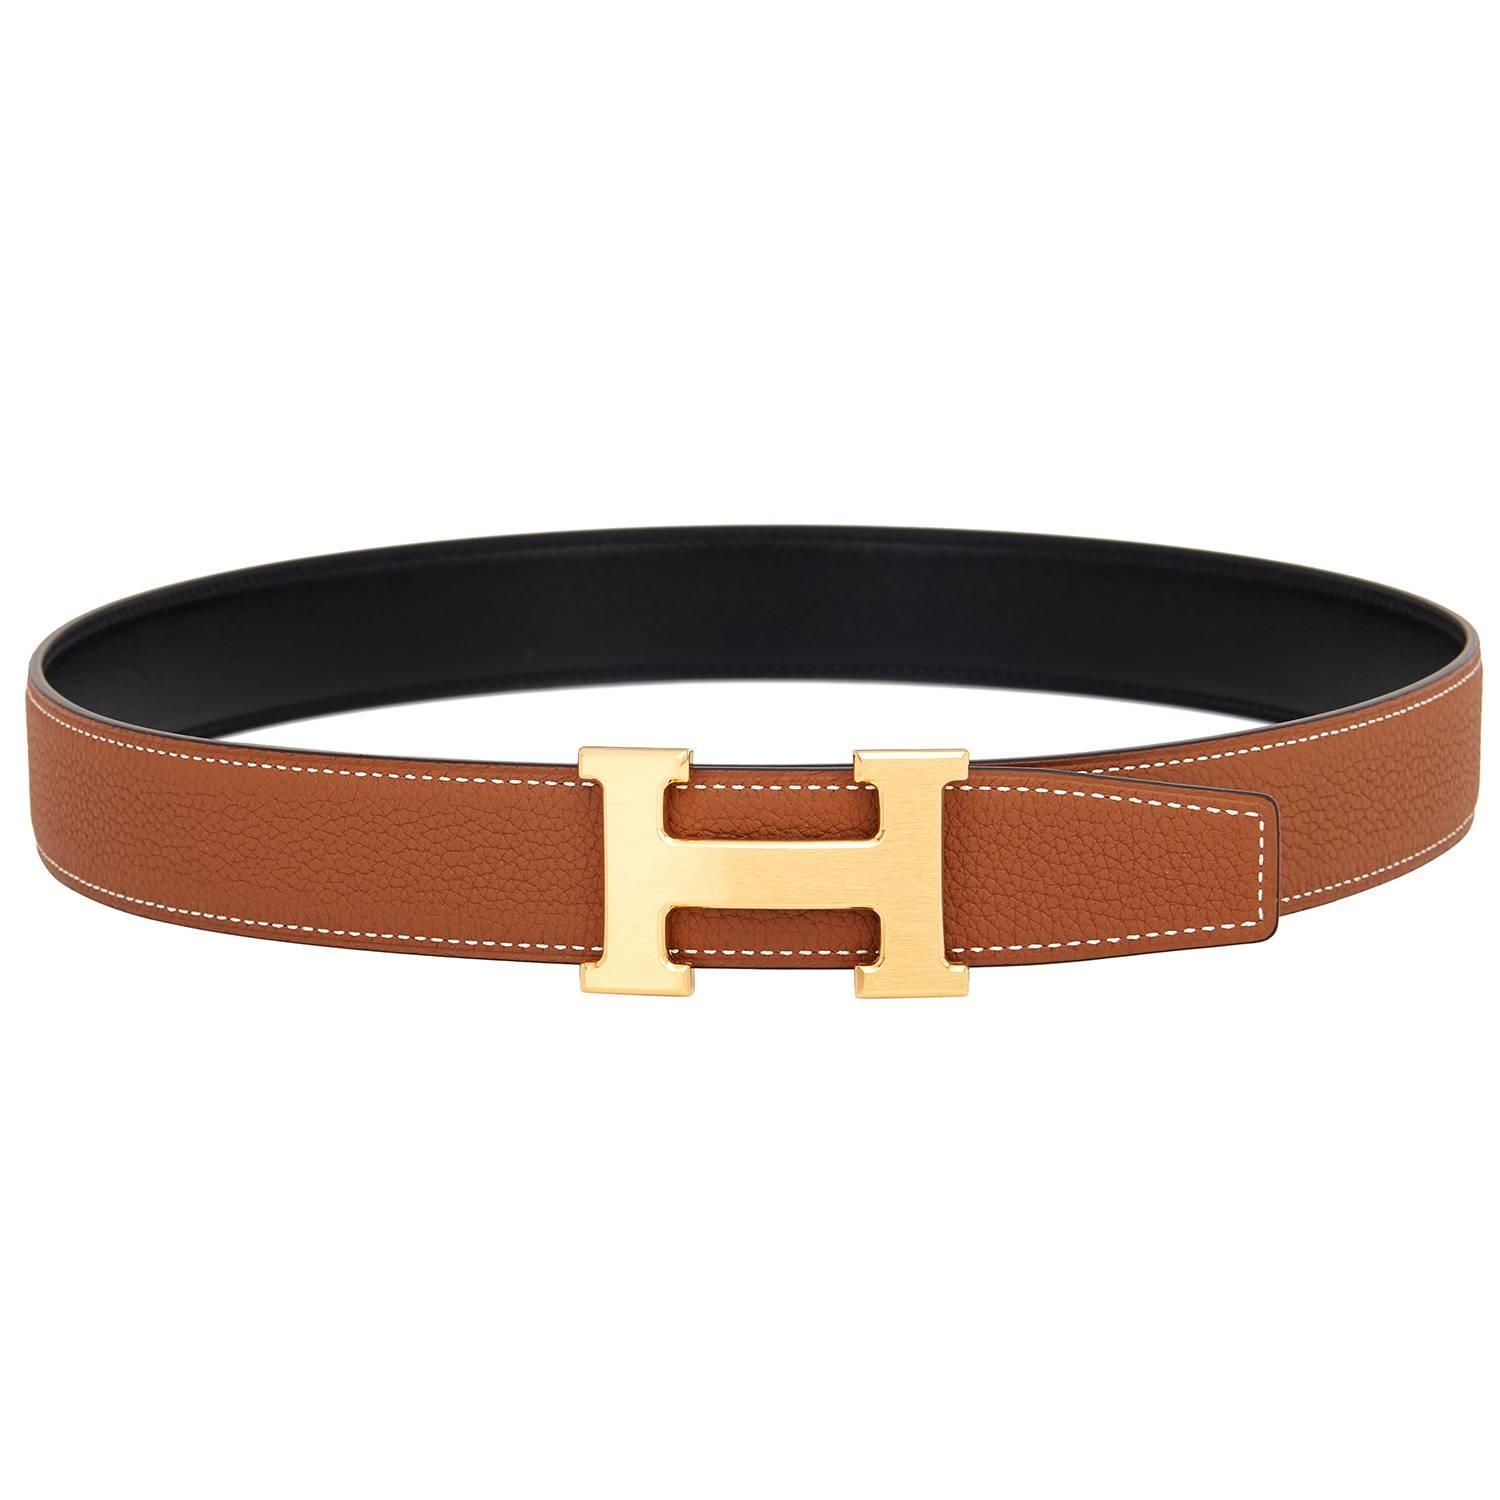 Luxury at Your Waist: Elevate Your Look with a Hermes Belt